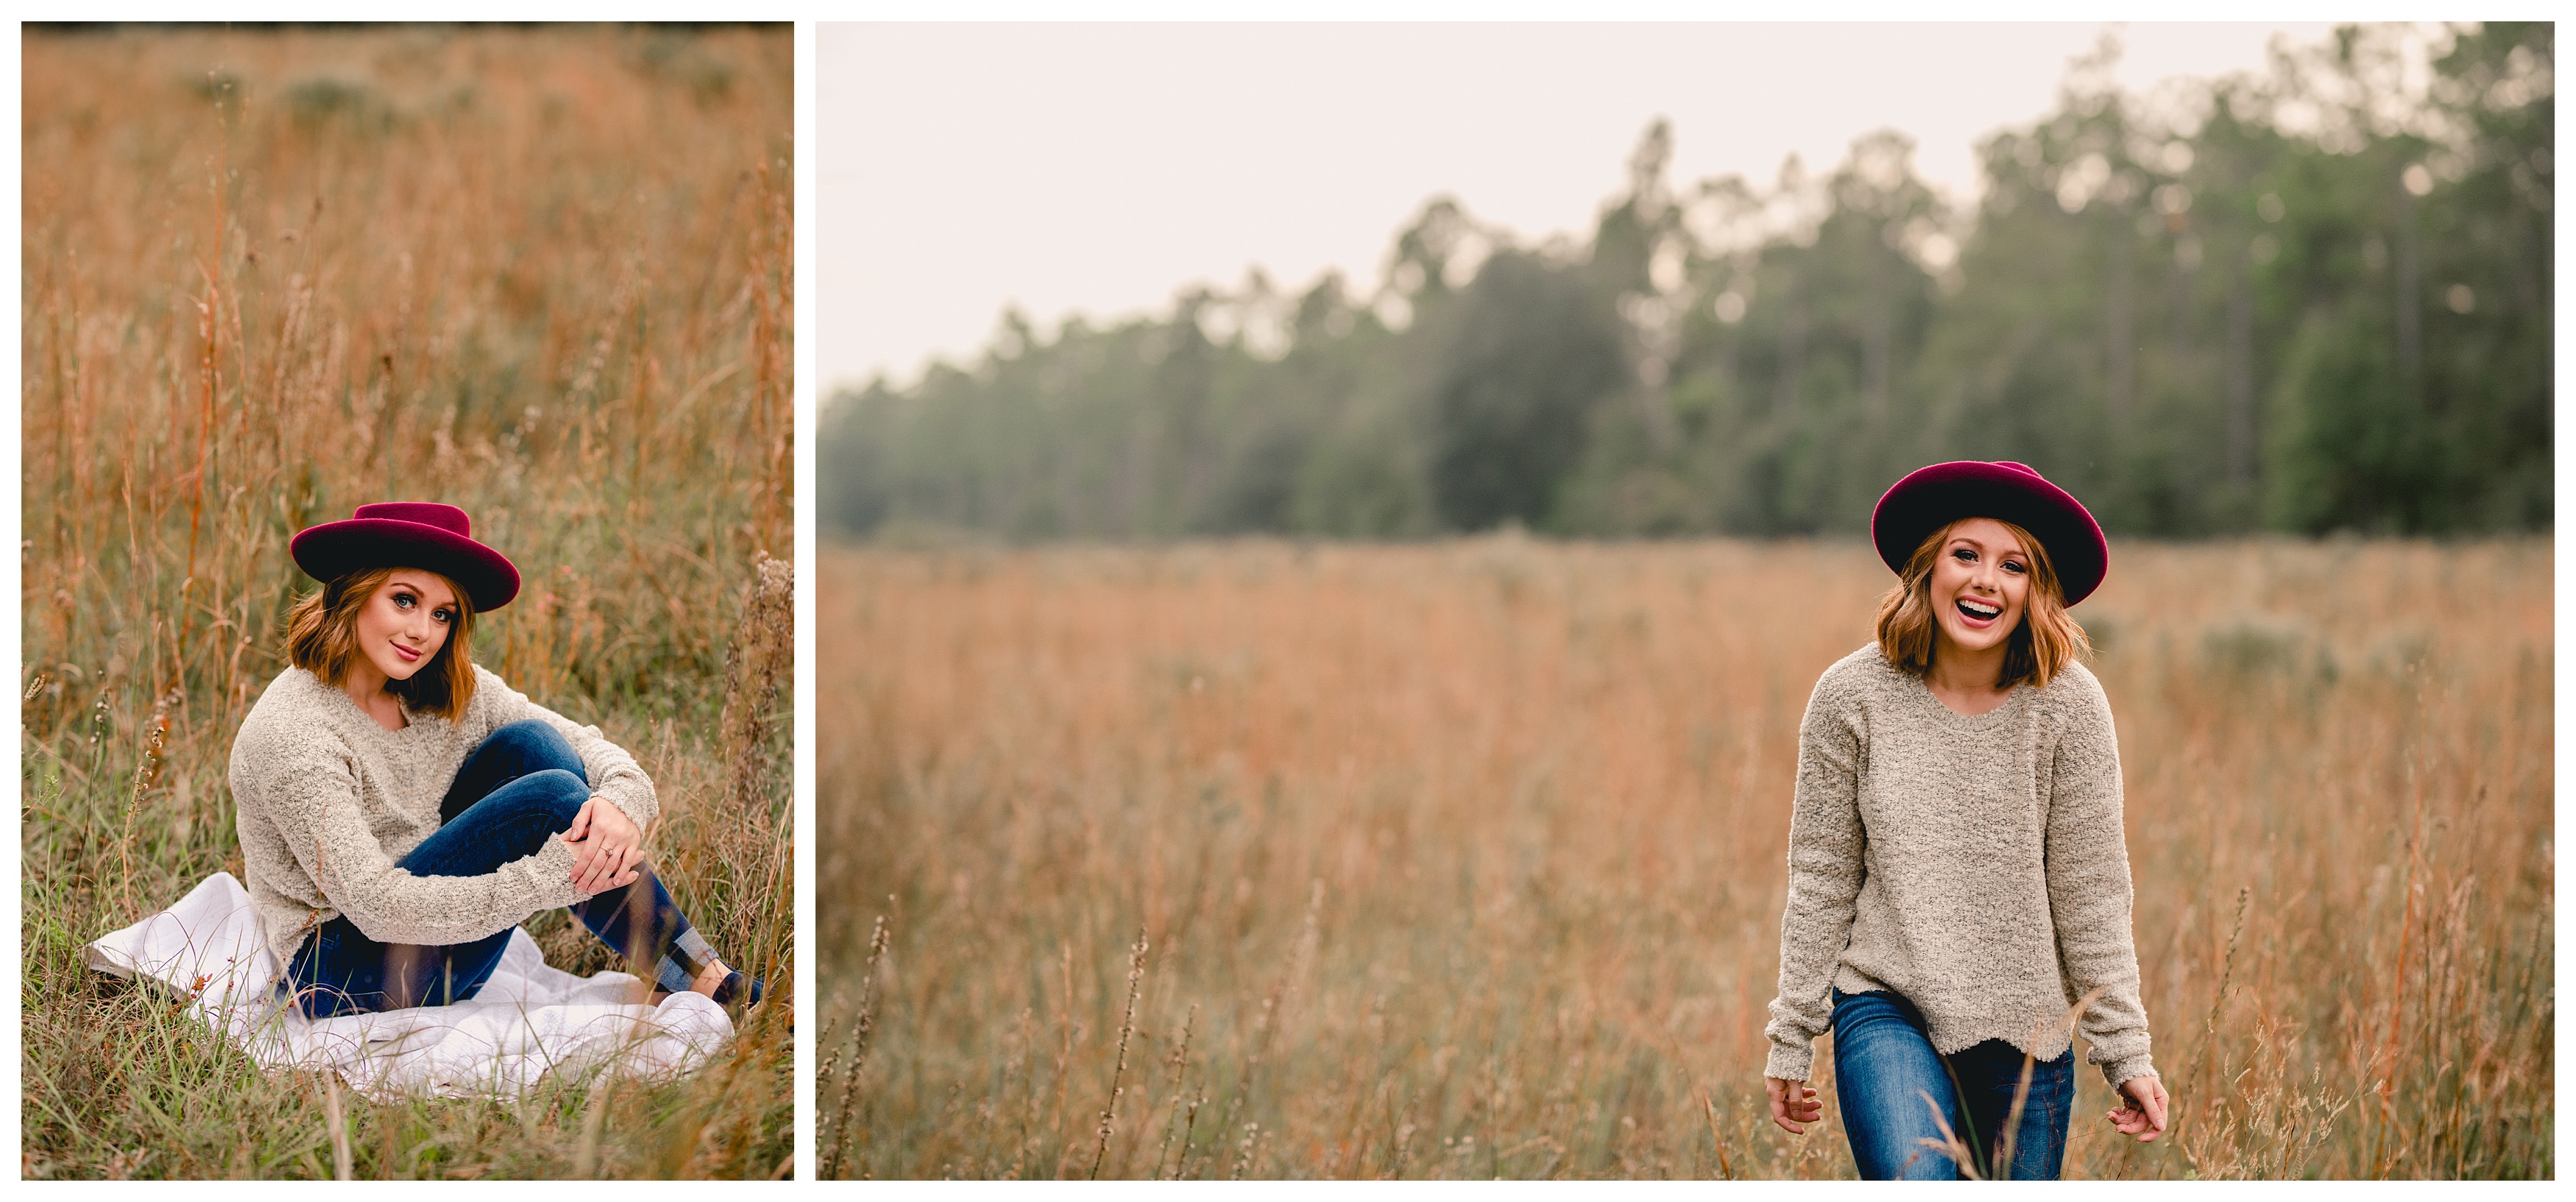 Natural and unposed senior photography in Tallahassee, Florida. Shelly Williams Photography